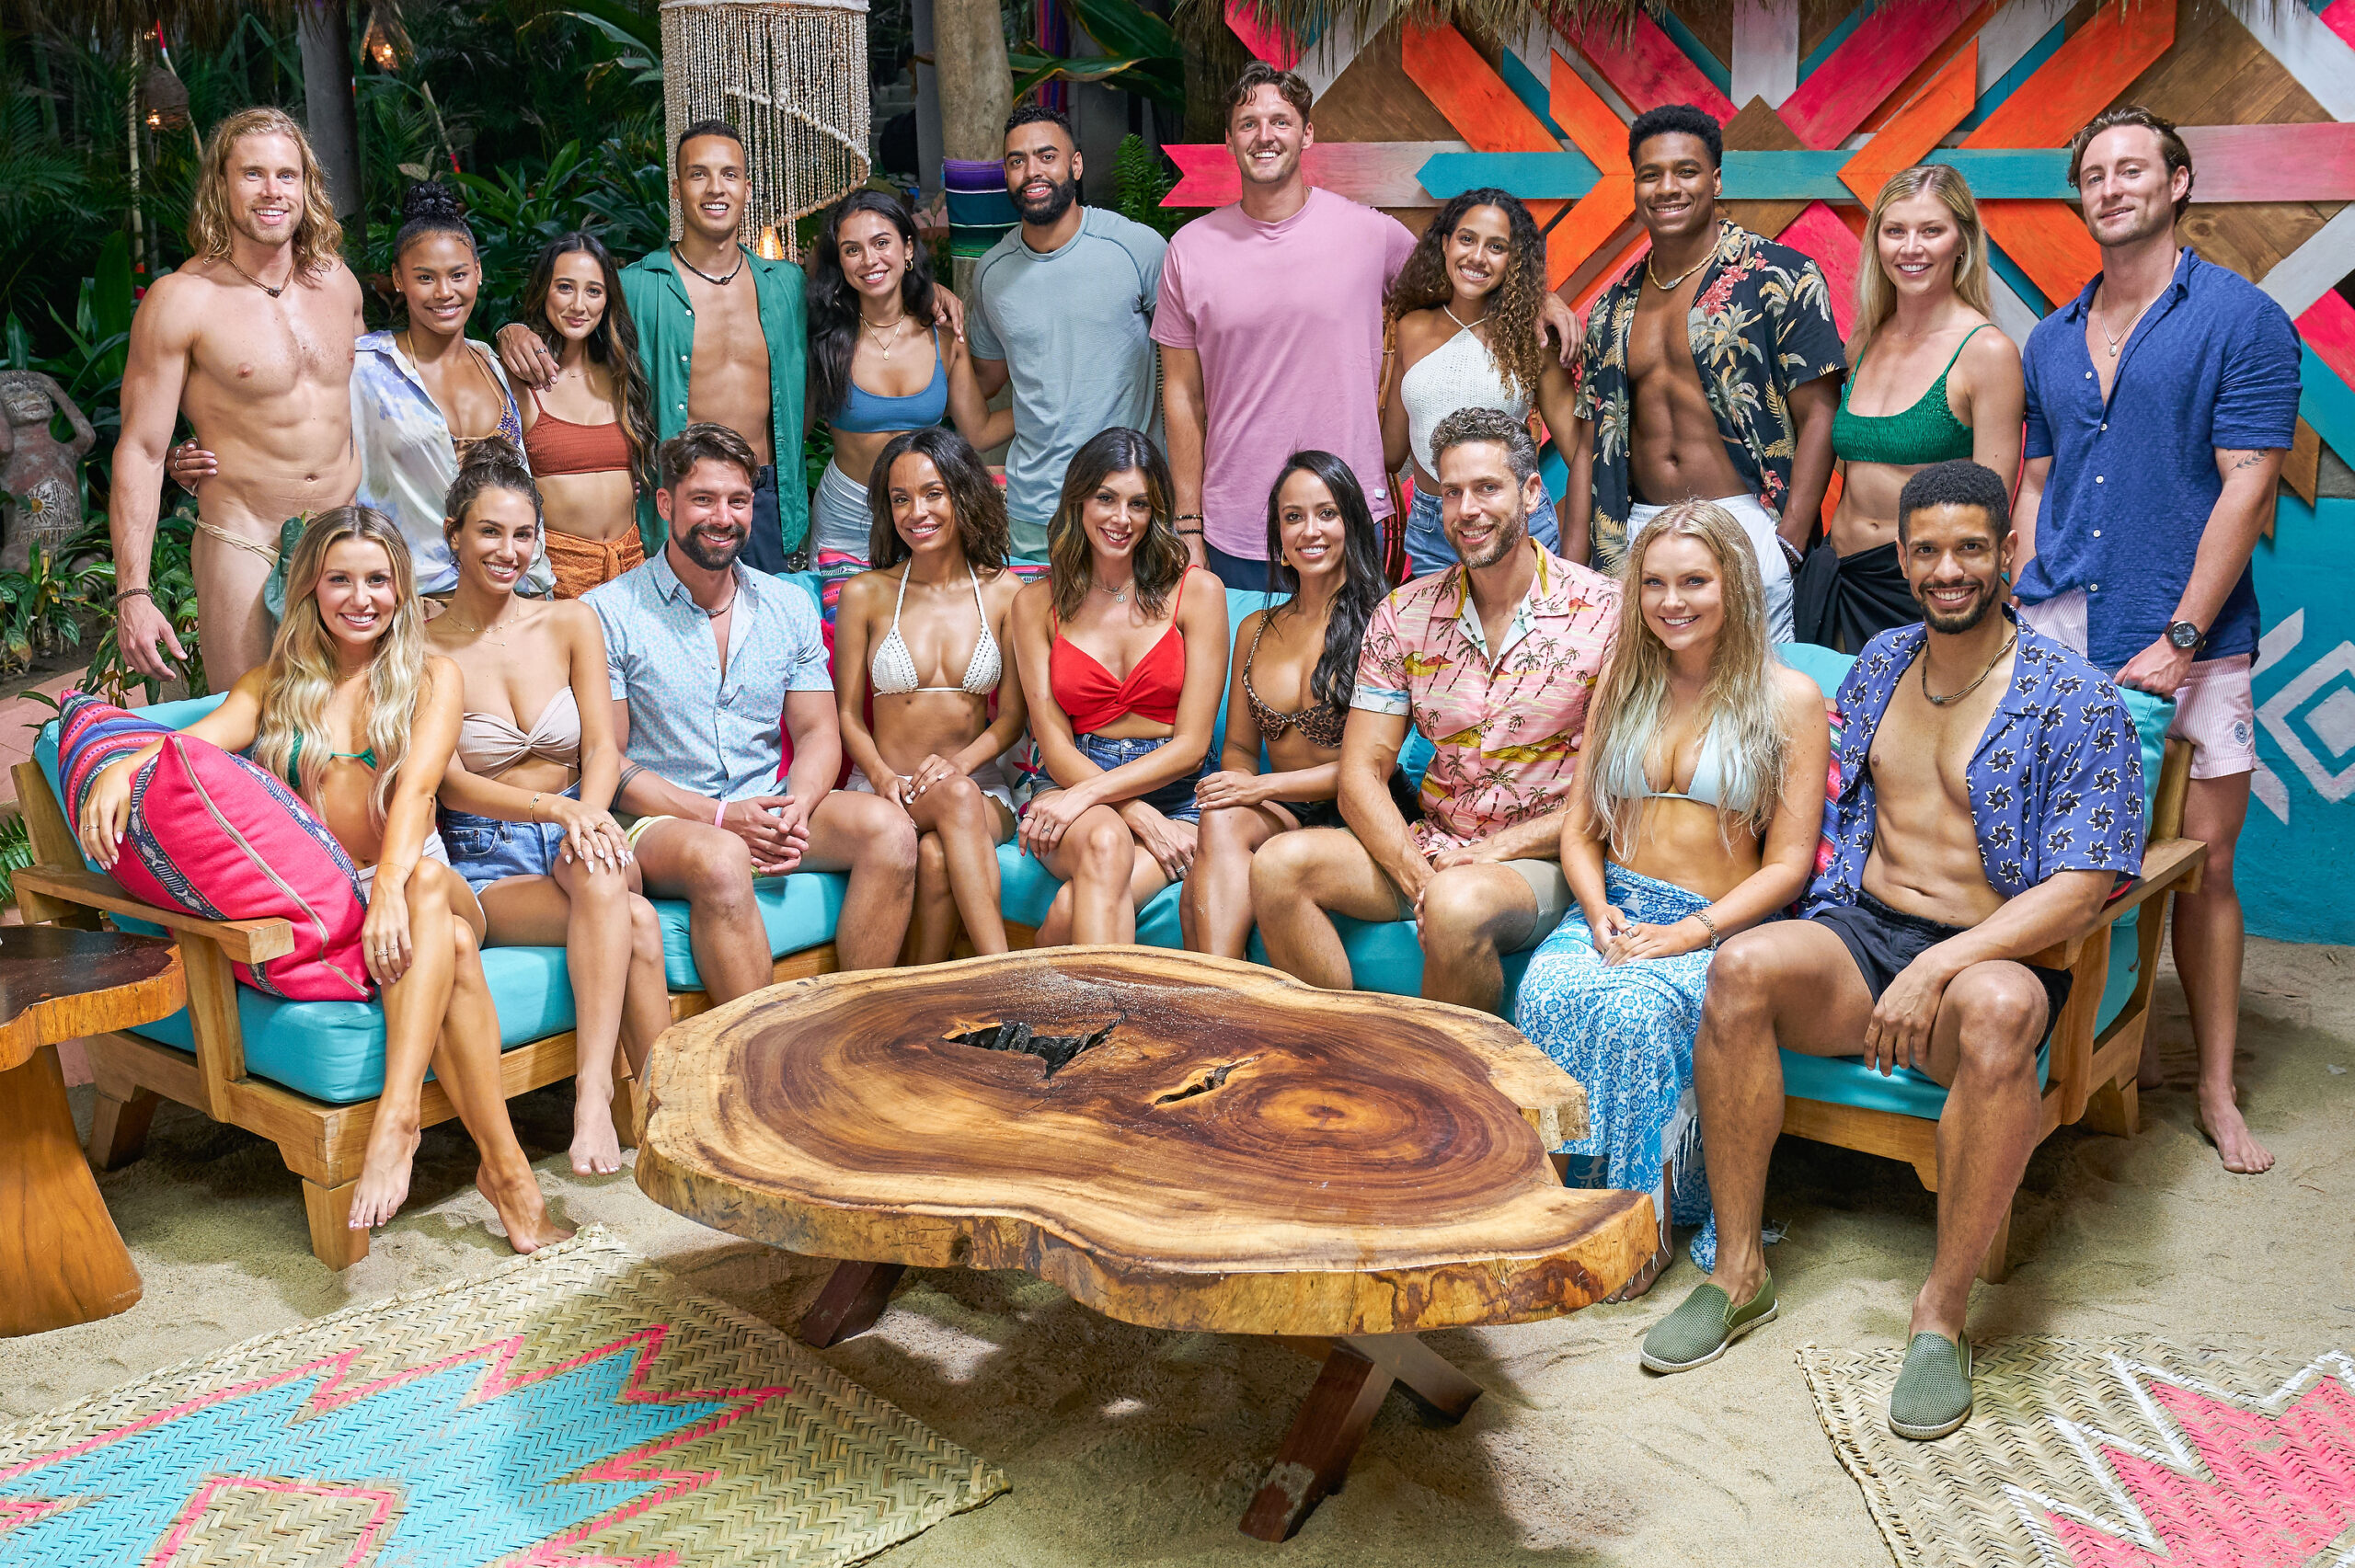 Reality Television: Bachelor in Paradise. 2014-Present. Bachelor Nation.